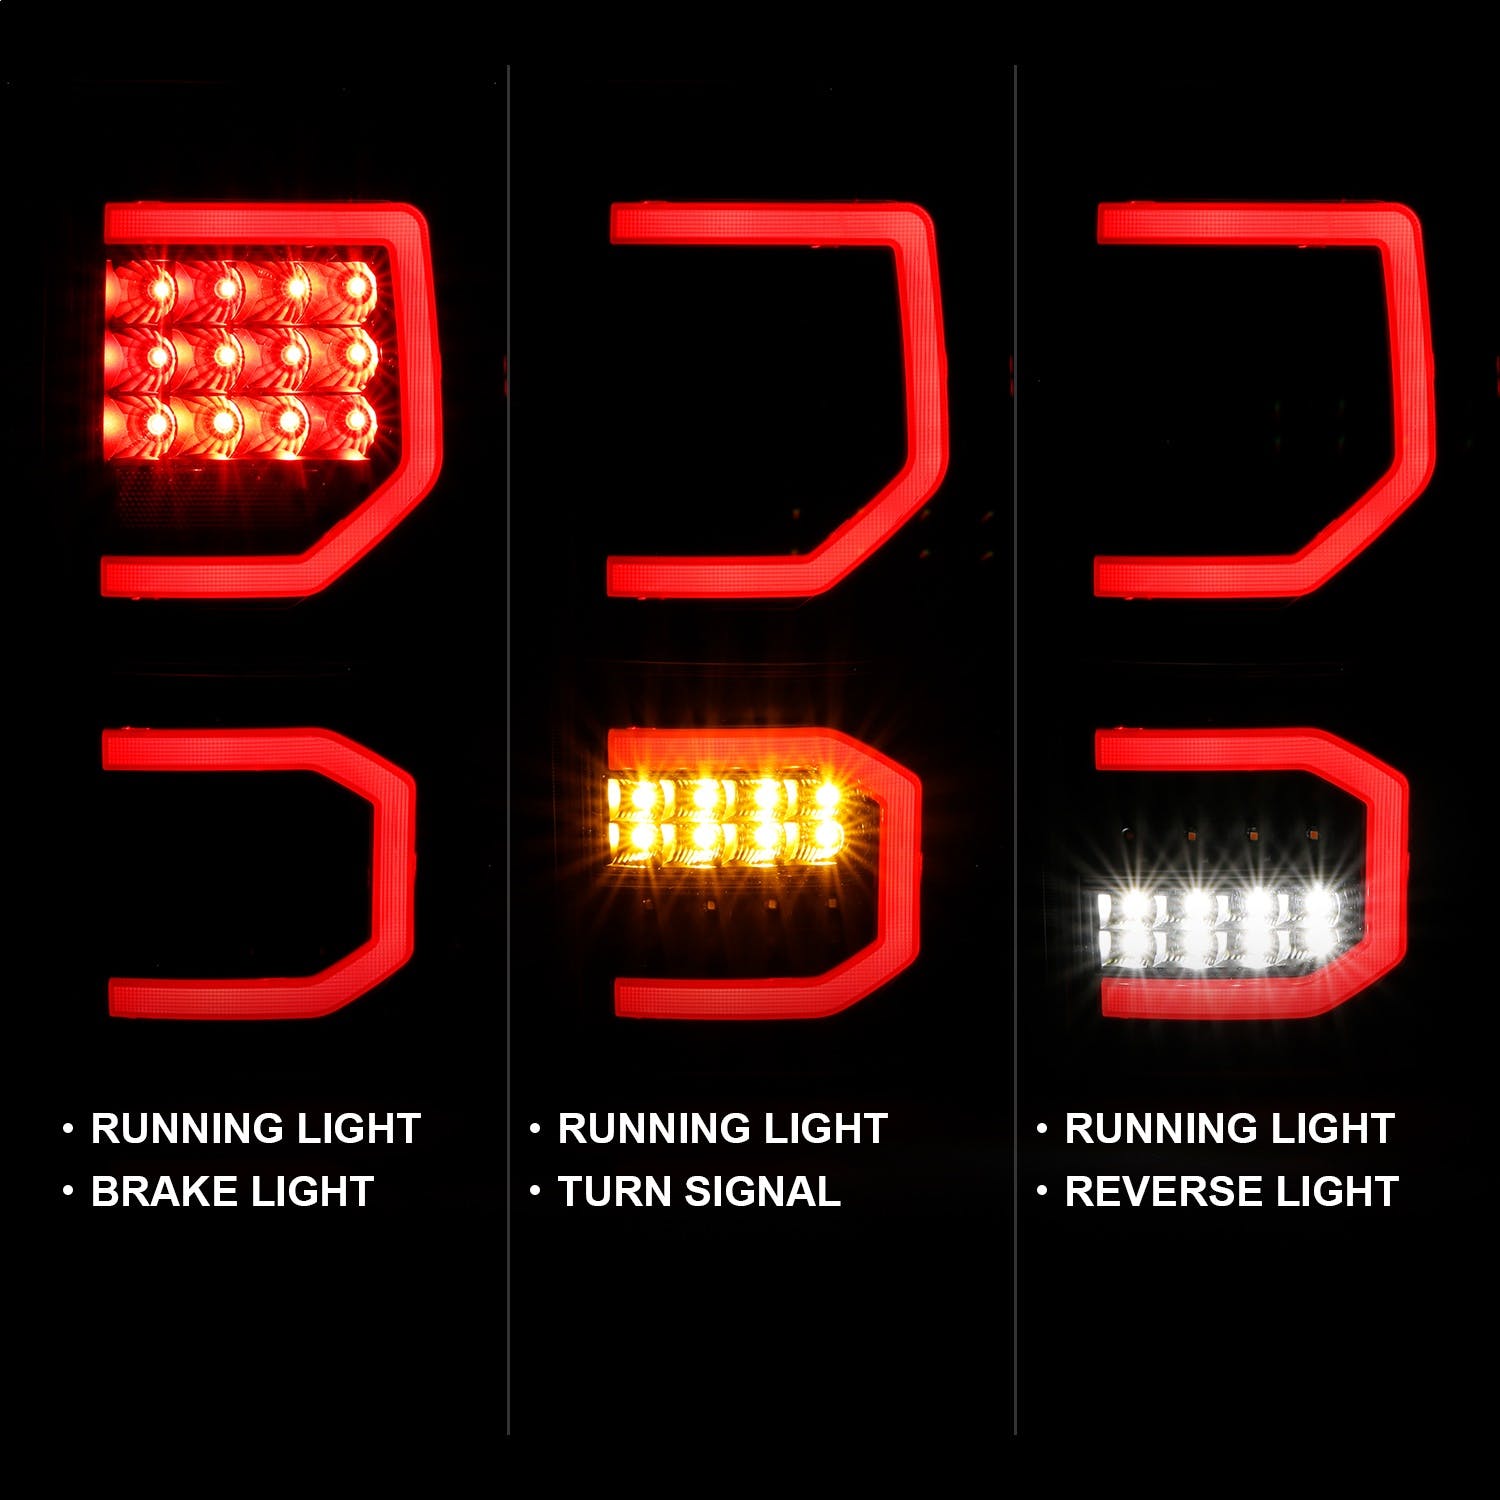 AnzoUSA 311336 LED Taillights Plank Style Black with Clear Lens